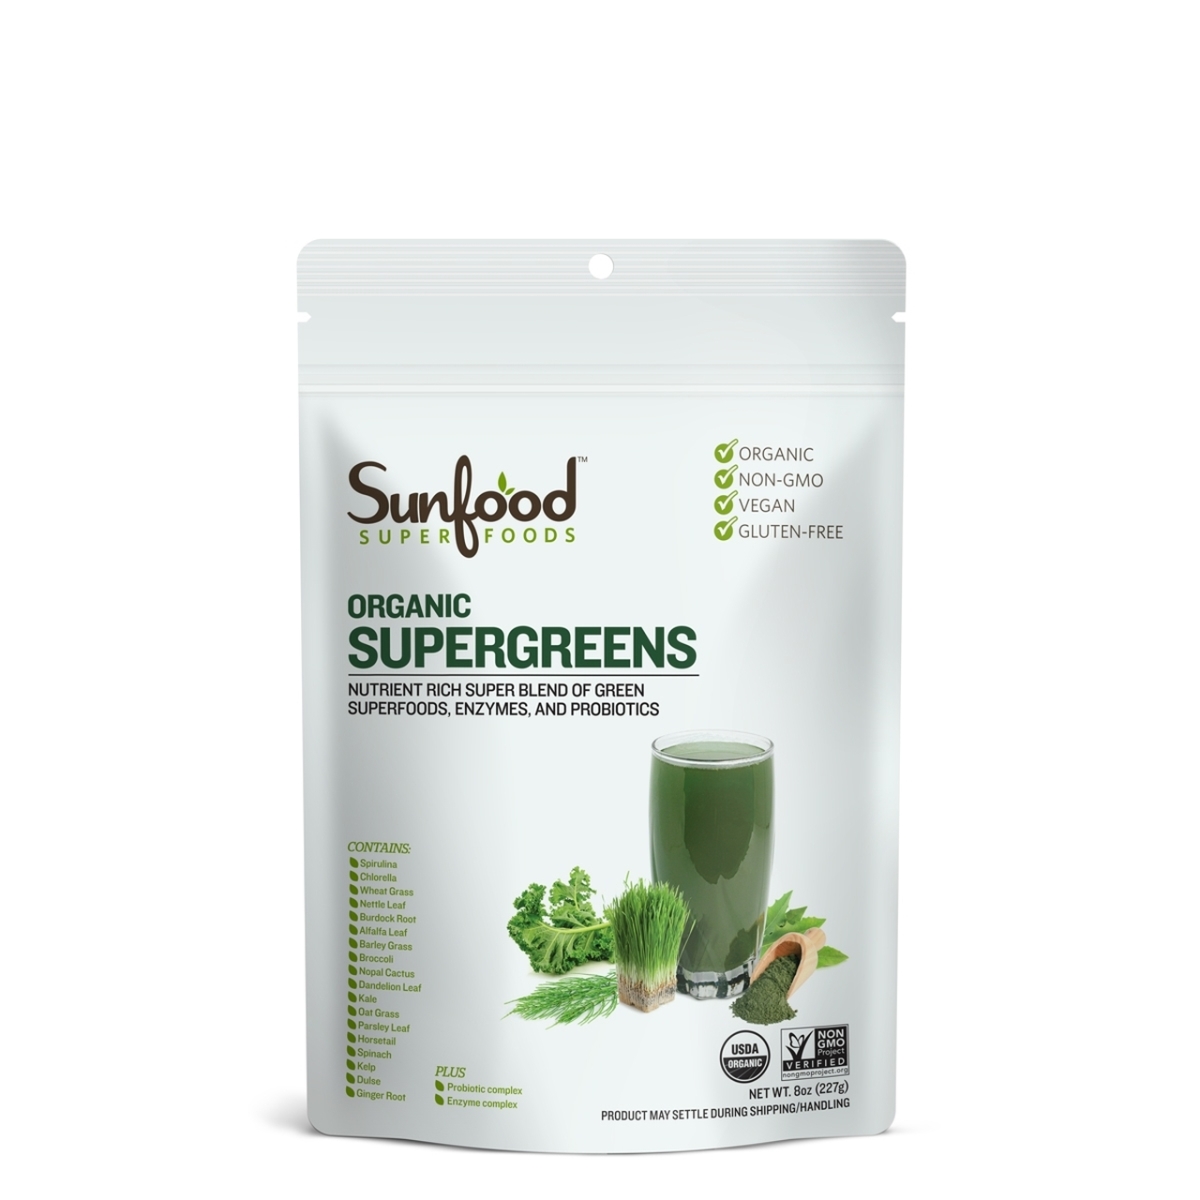 Picture of Sunfood Superfoods HG2092989 8 oz Organic Supergreens